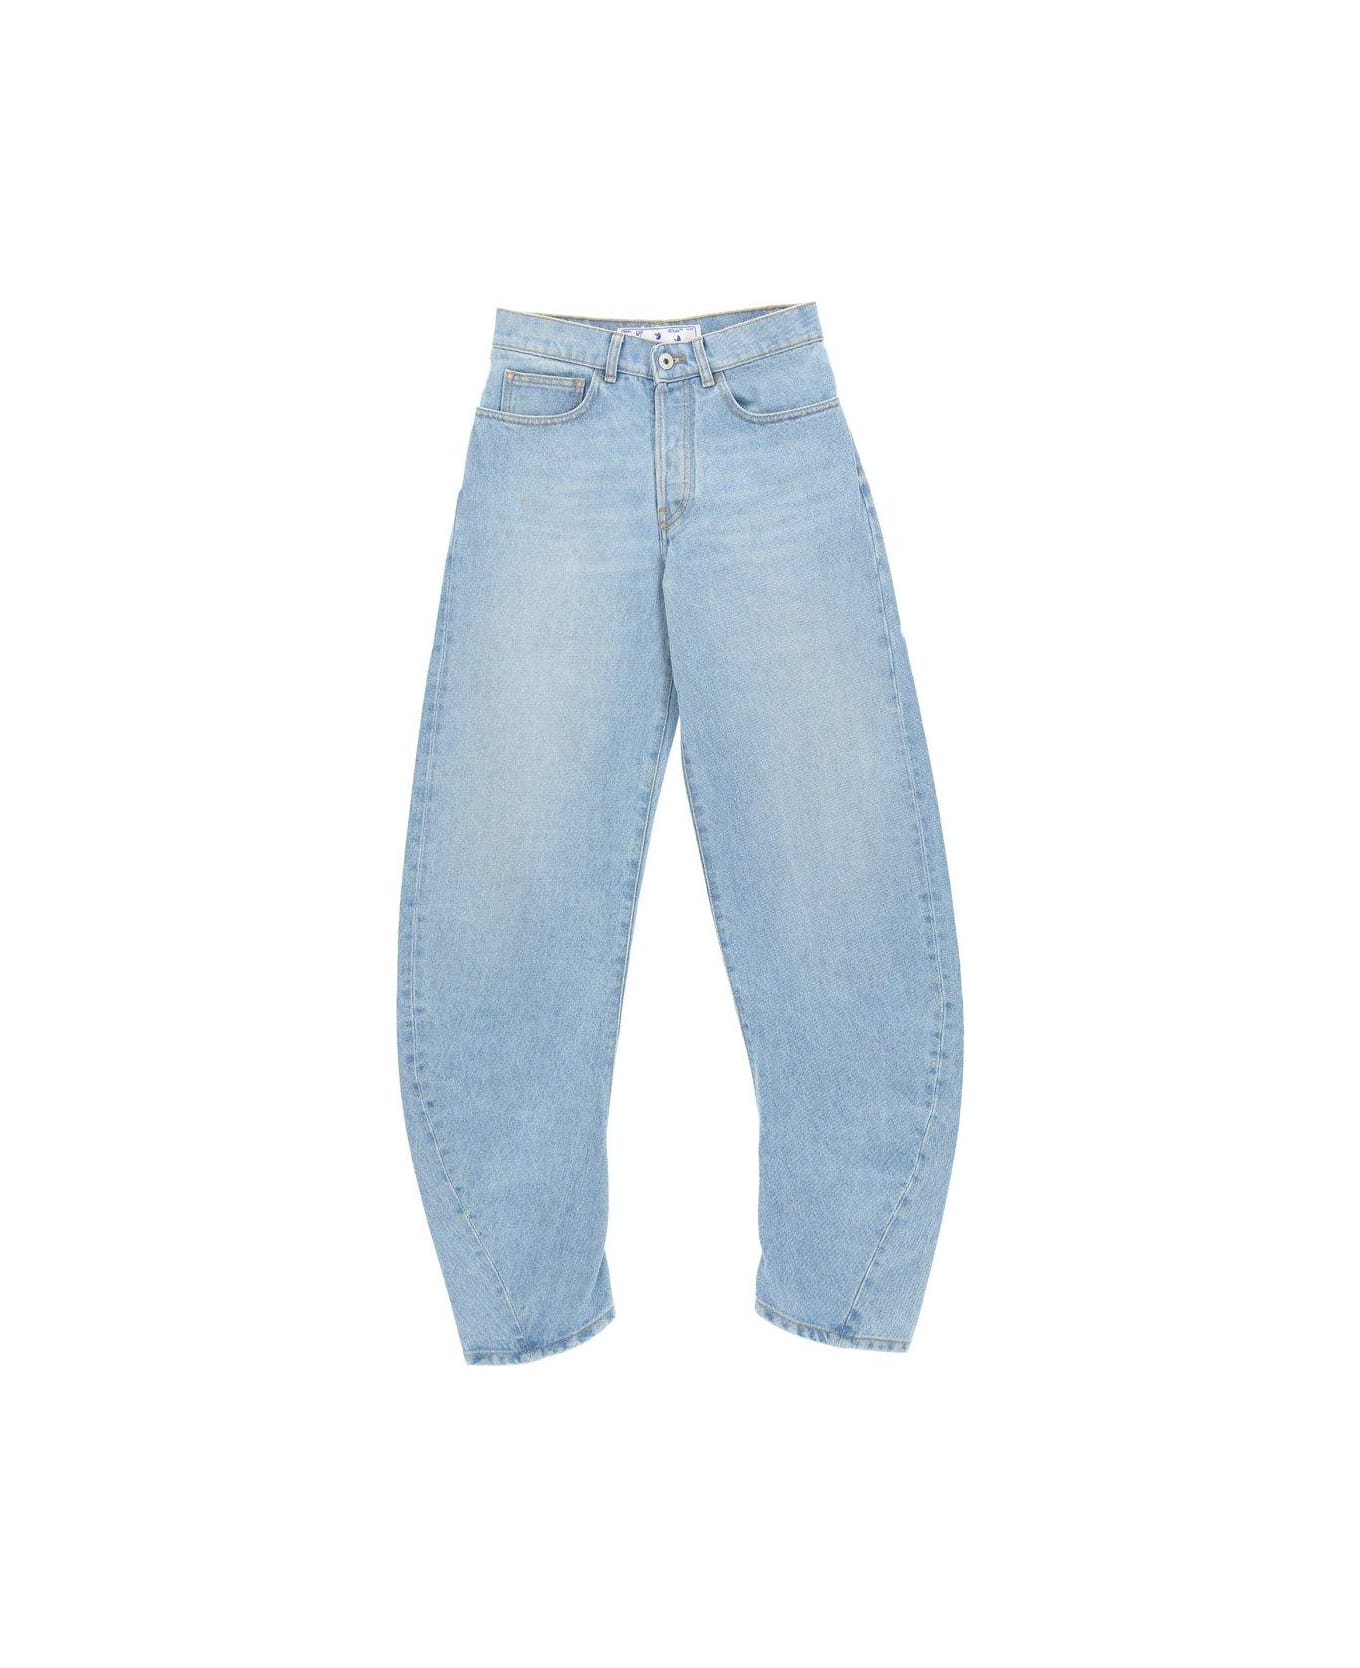 Off-White Banana Logo Patch Tapered Jeans - Light Blue